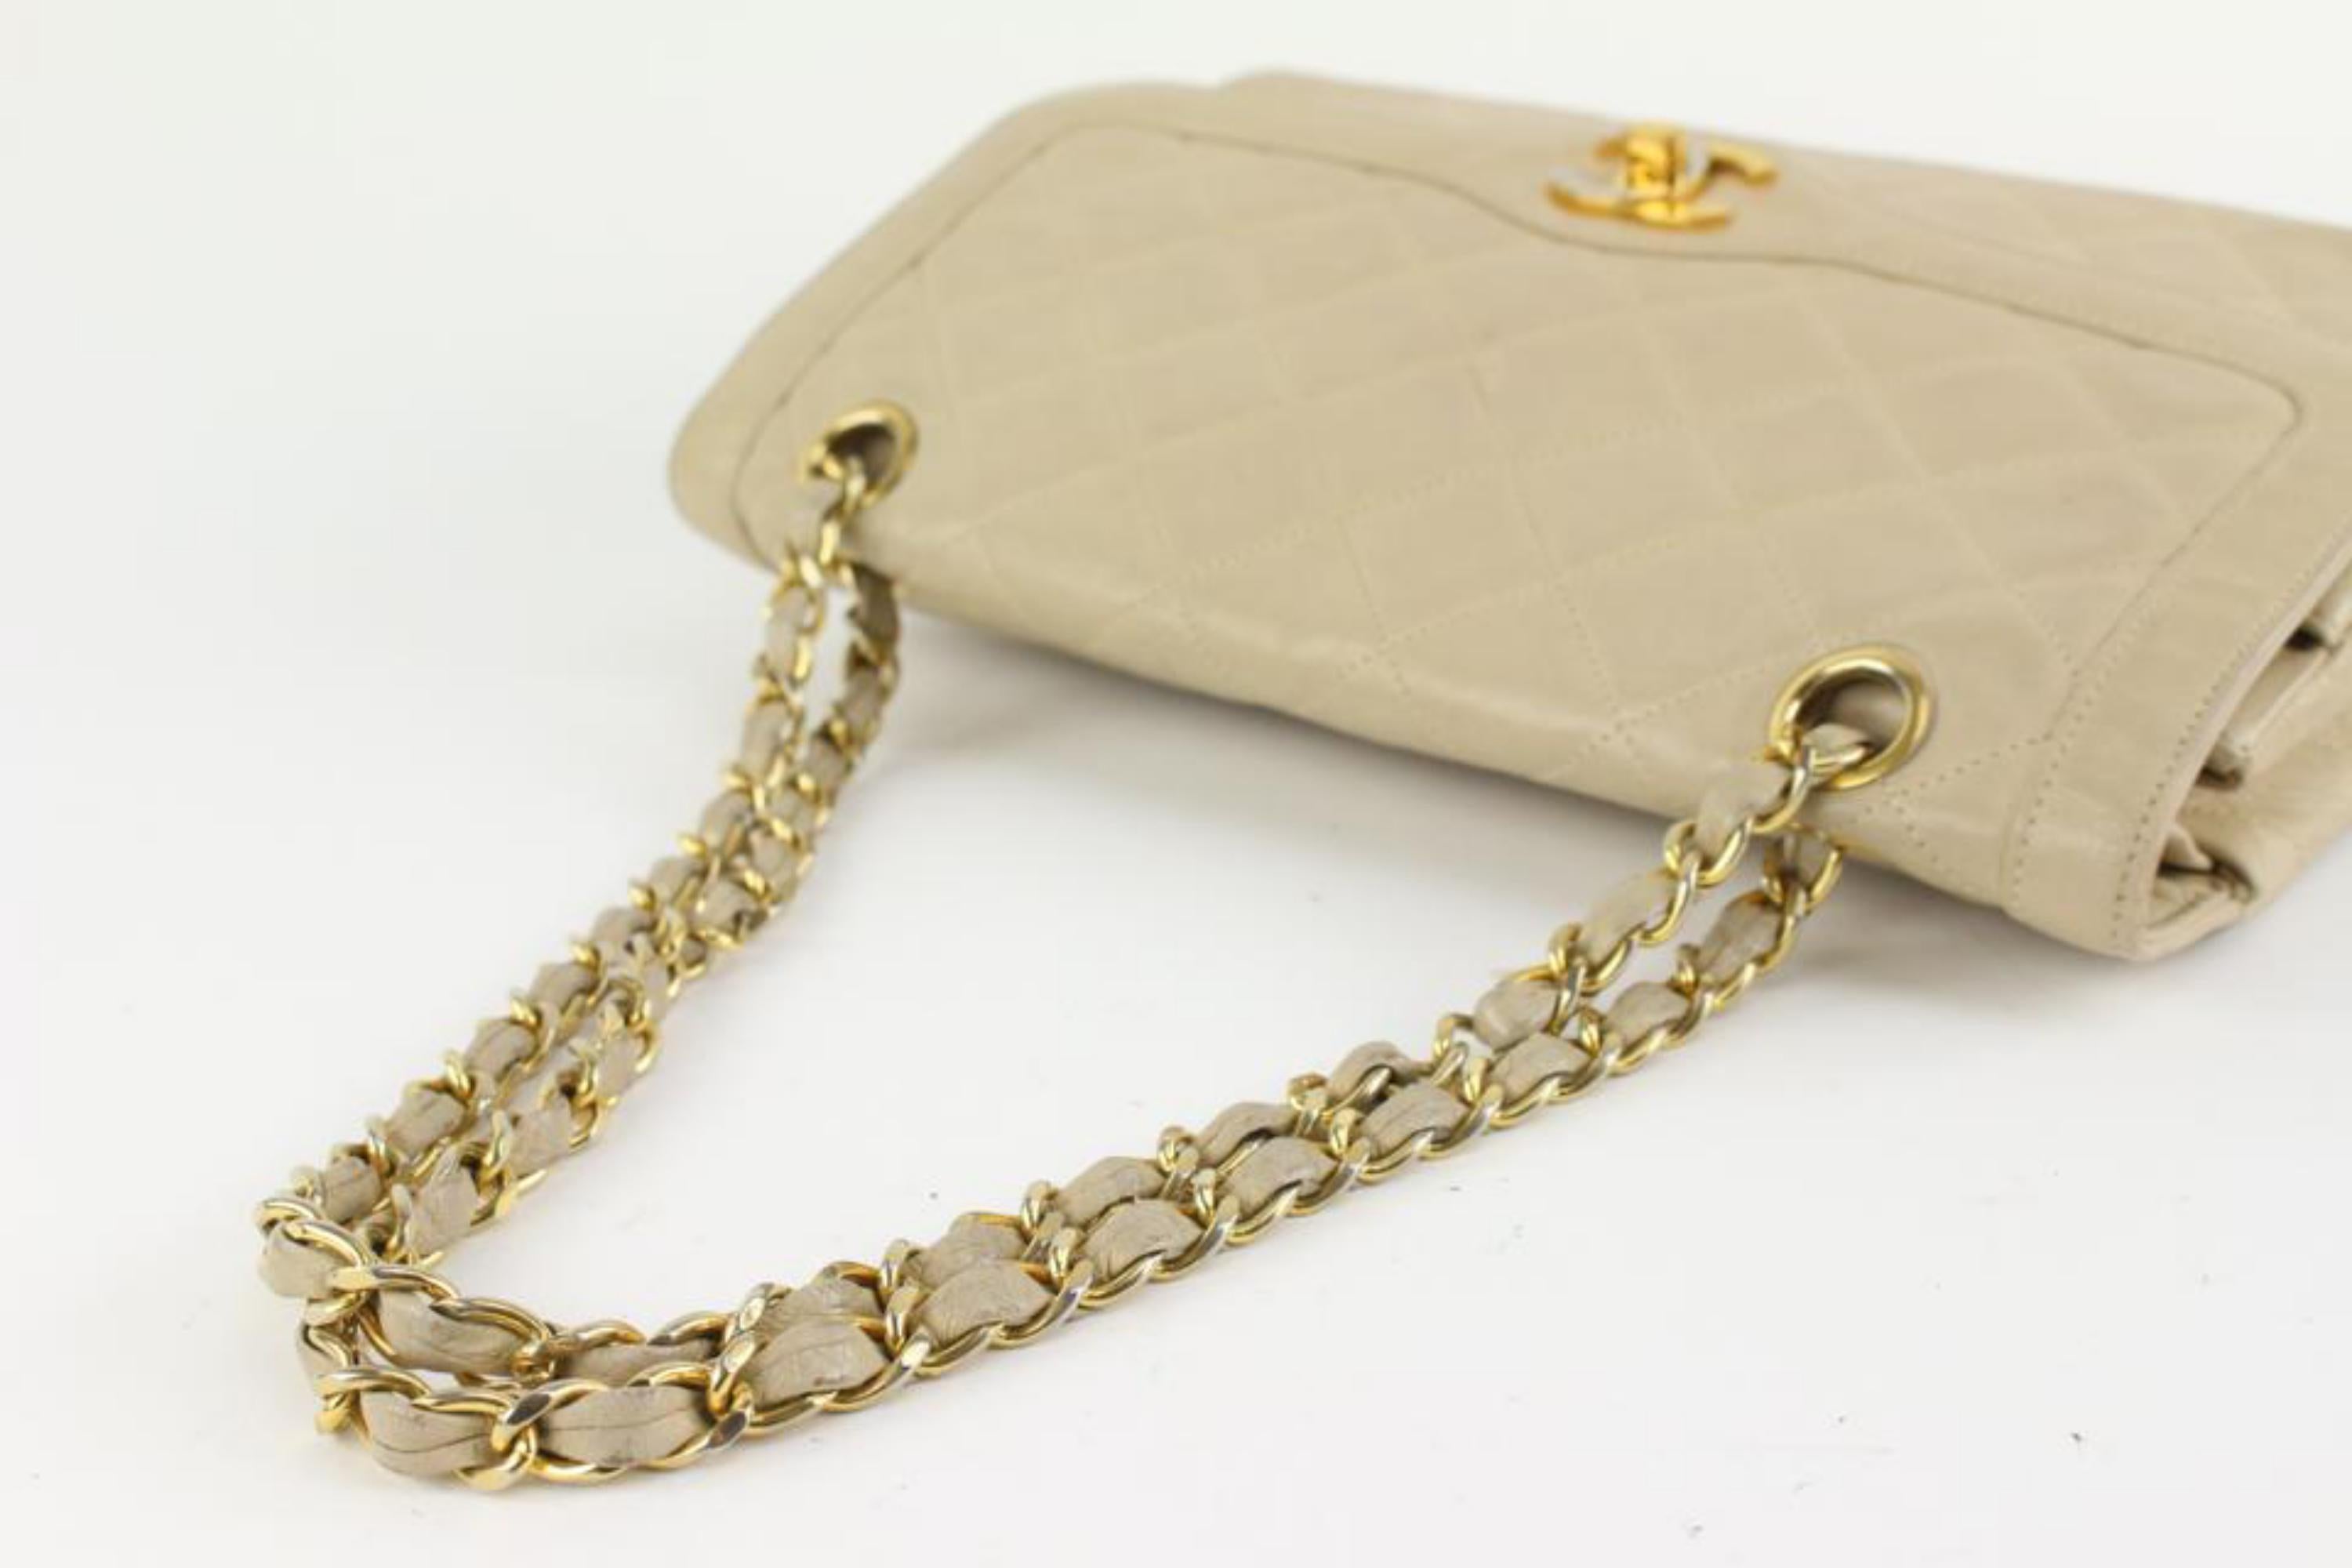 Chanel Limited Two-Tone Paris Edition Beige Classic Flap 1220c43 In Good Condition For Sale In Dix hills, NY